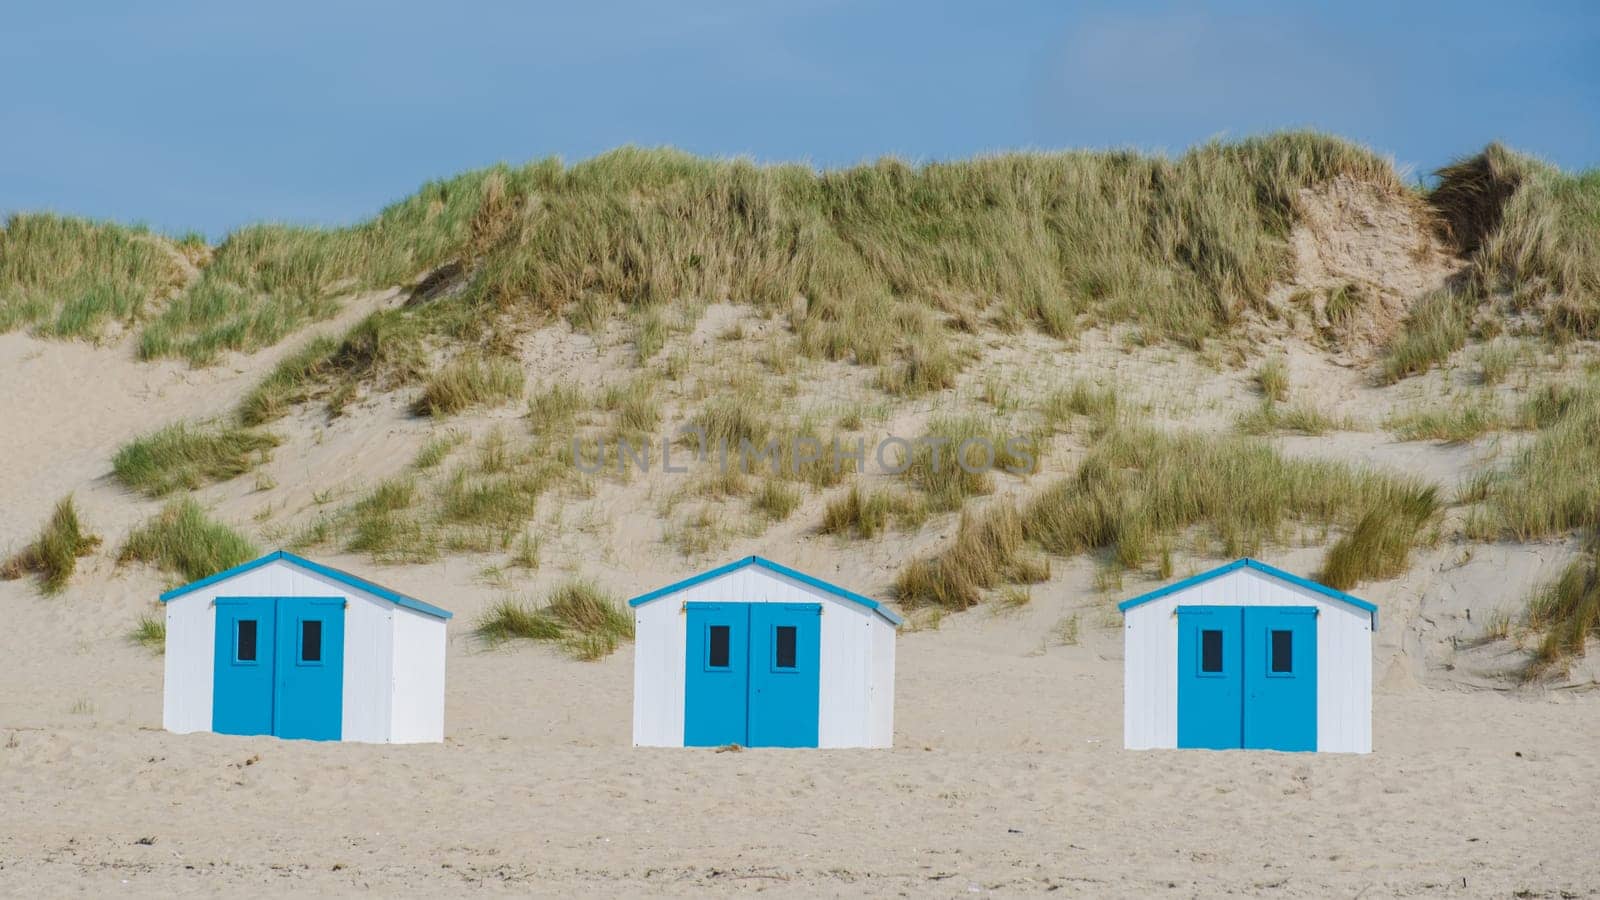 Three colorful beach huts stand in a row on the sandy shores of Texel, Netherlands, under a clear blue sky.